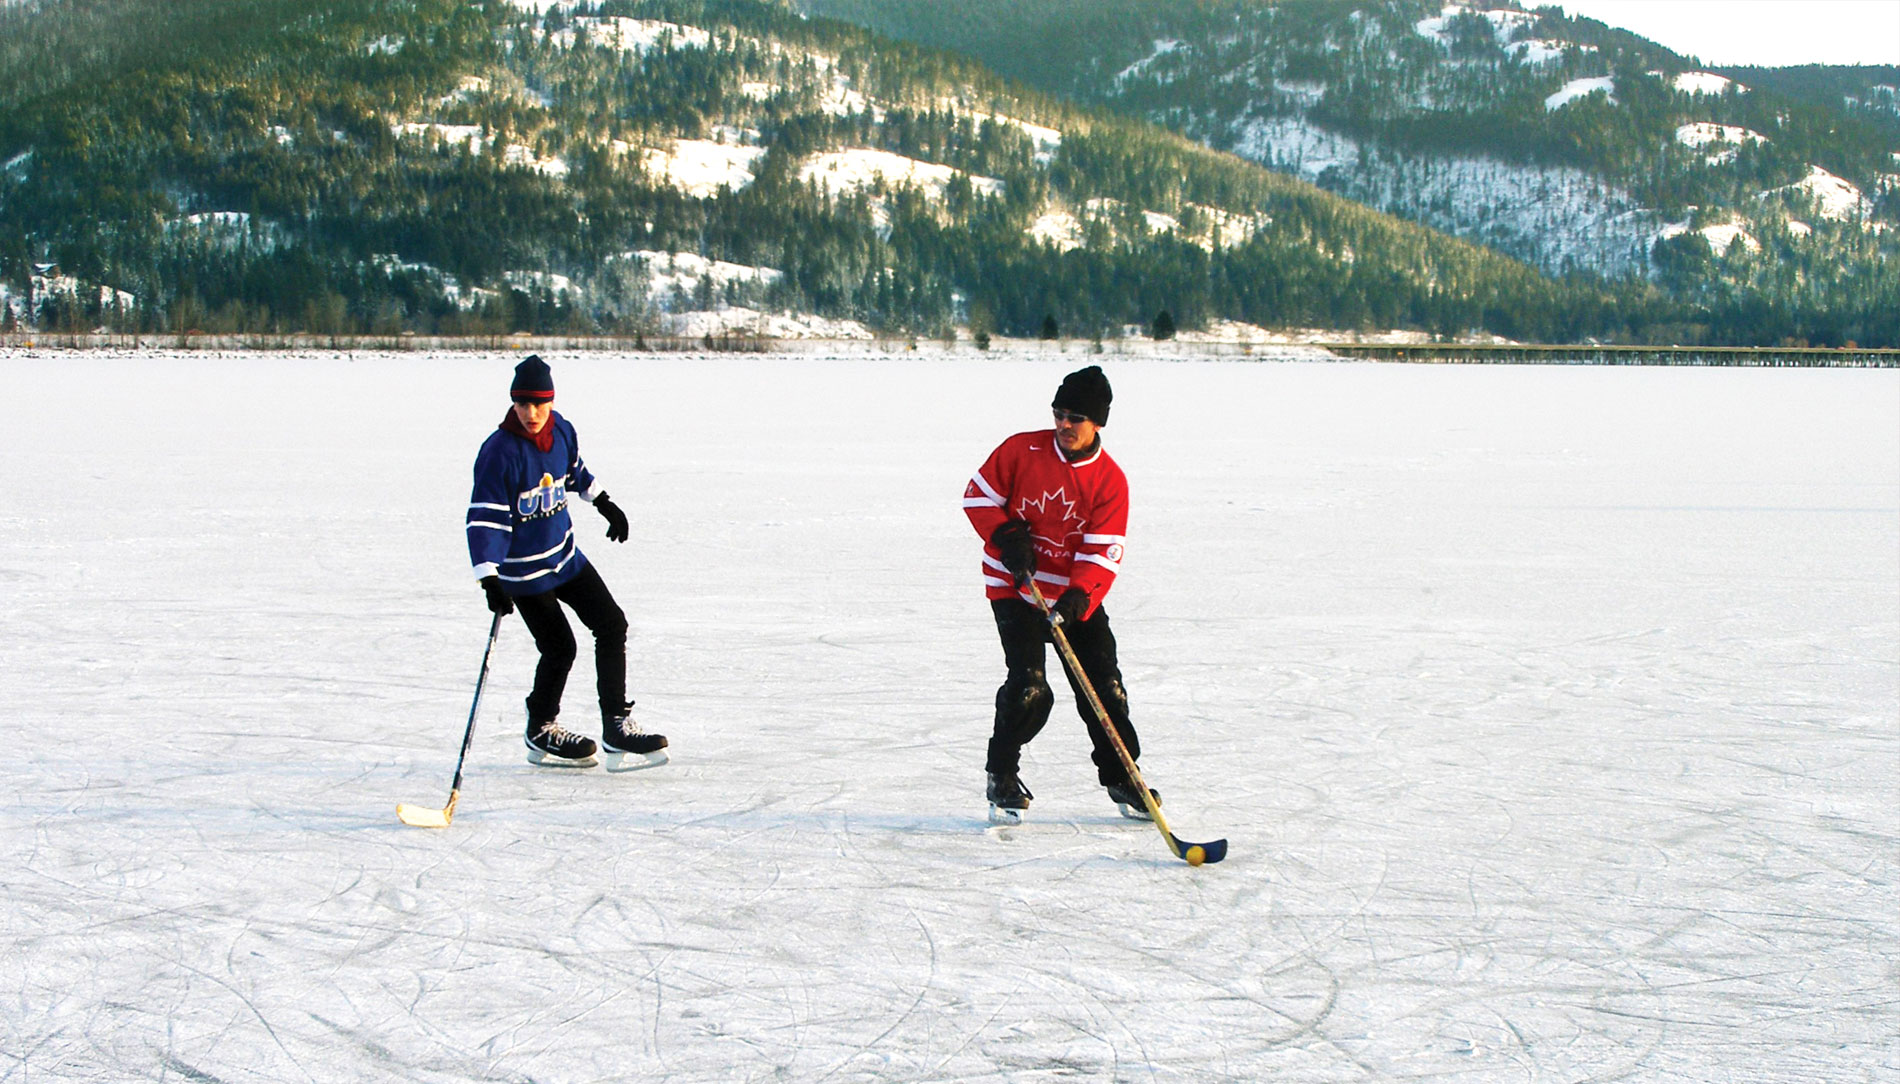 Hockey skaters on frozen waters in Northern Idaho